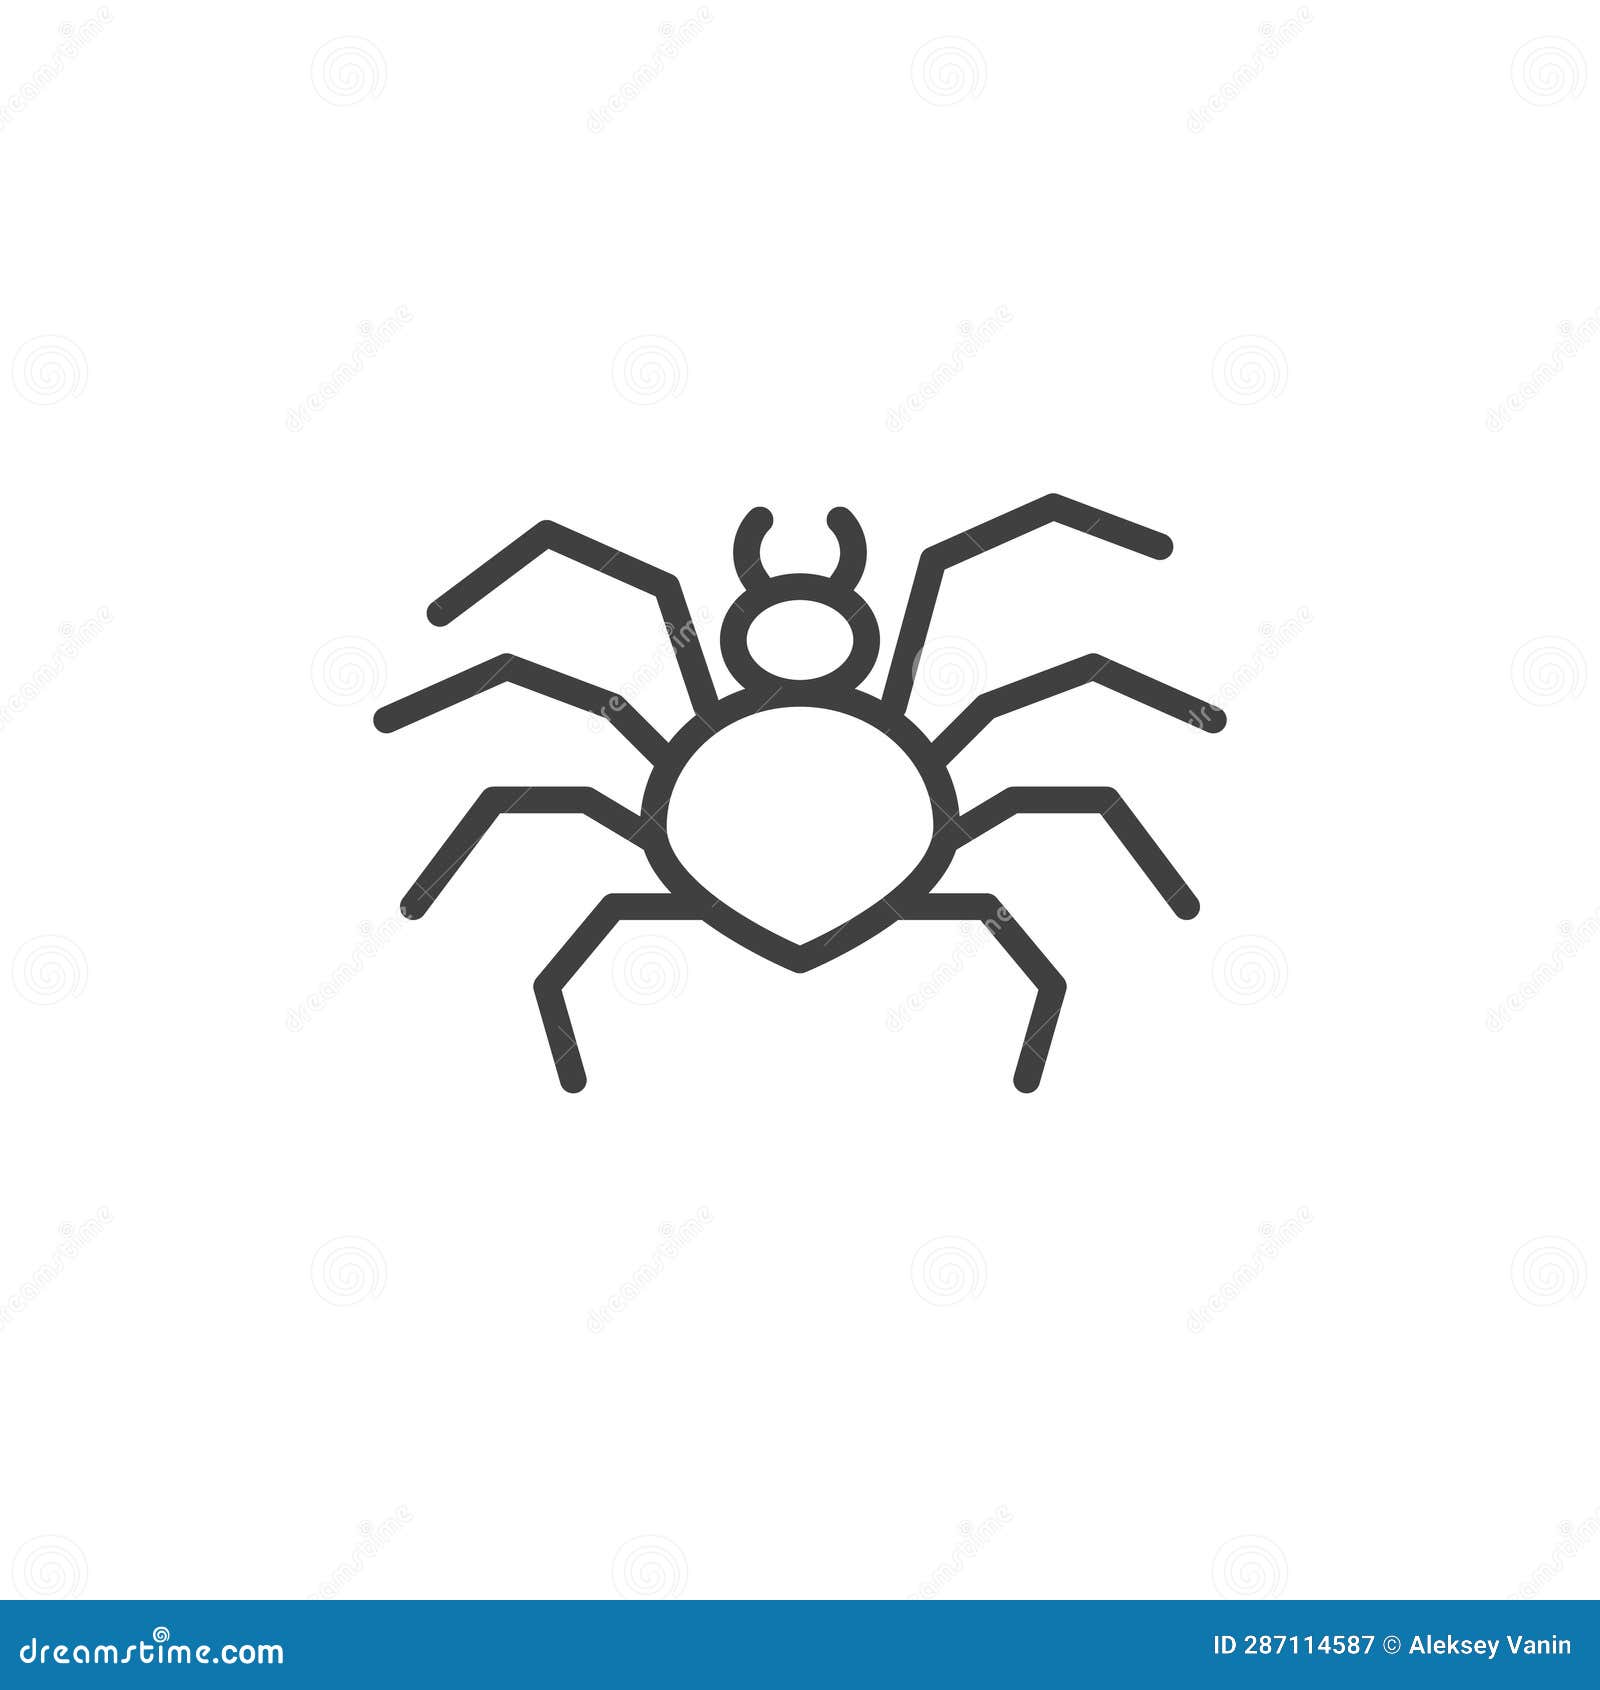 Spider line icon stock vector. Illustration of hollow - 287114587